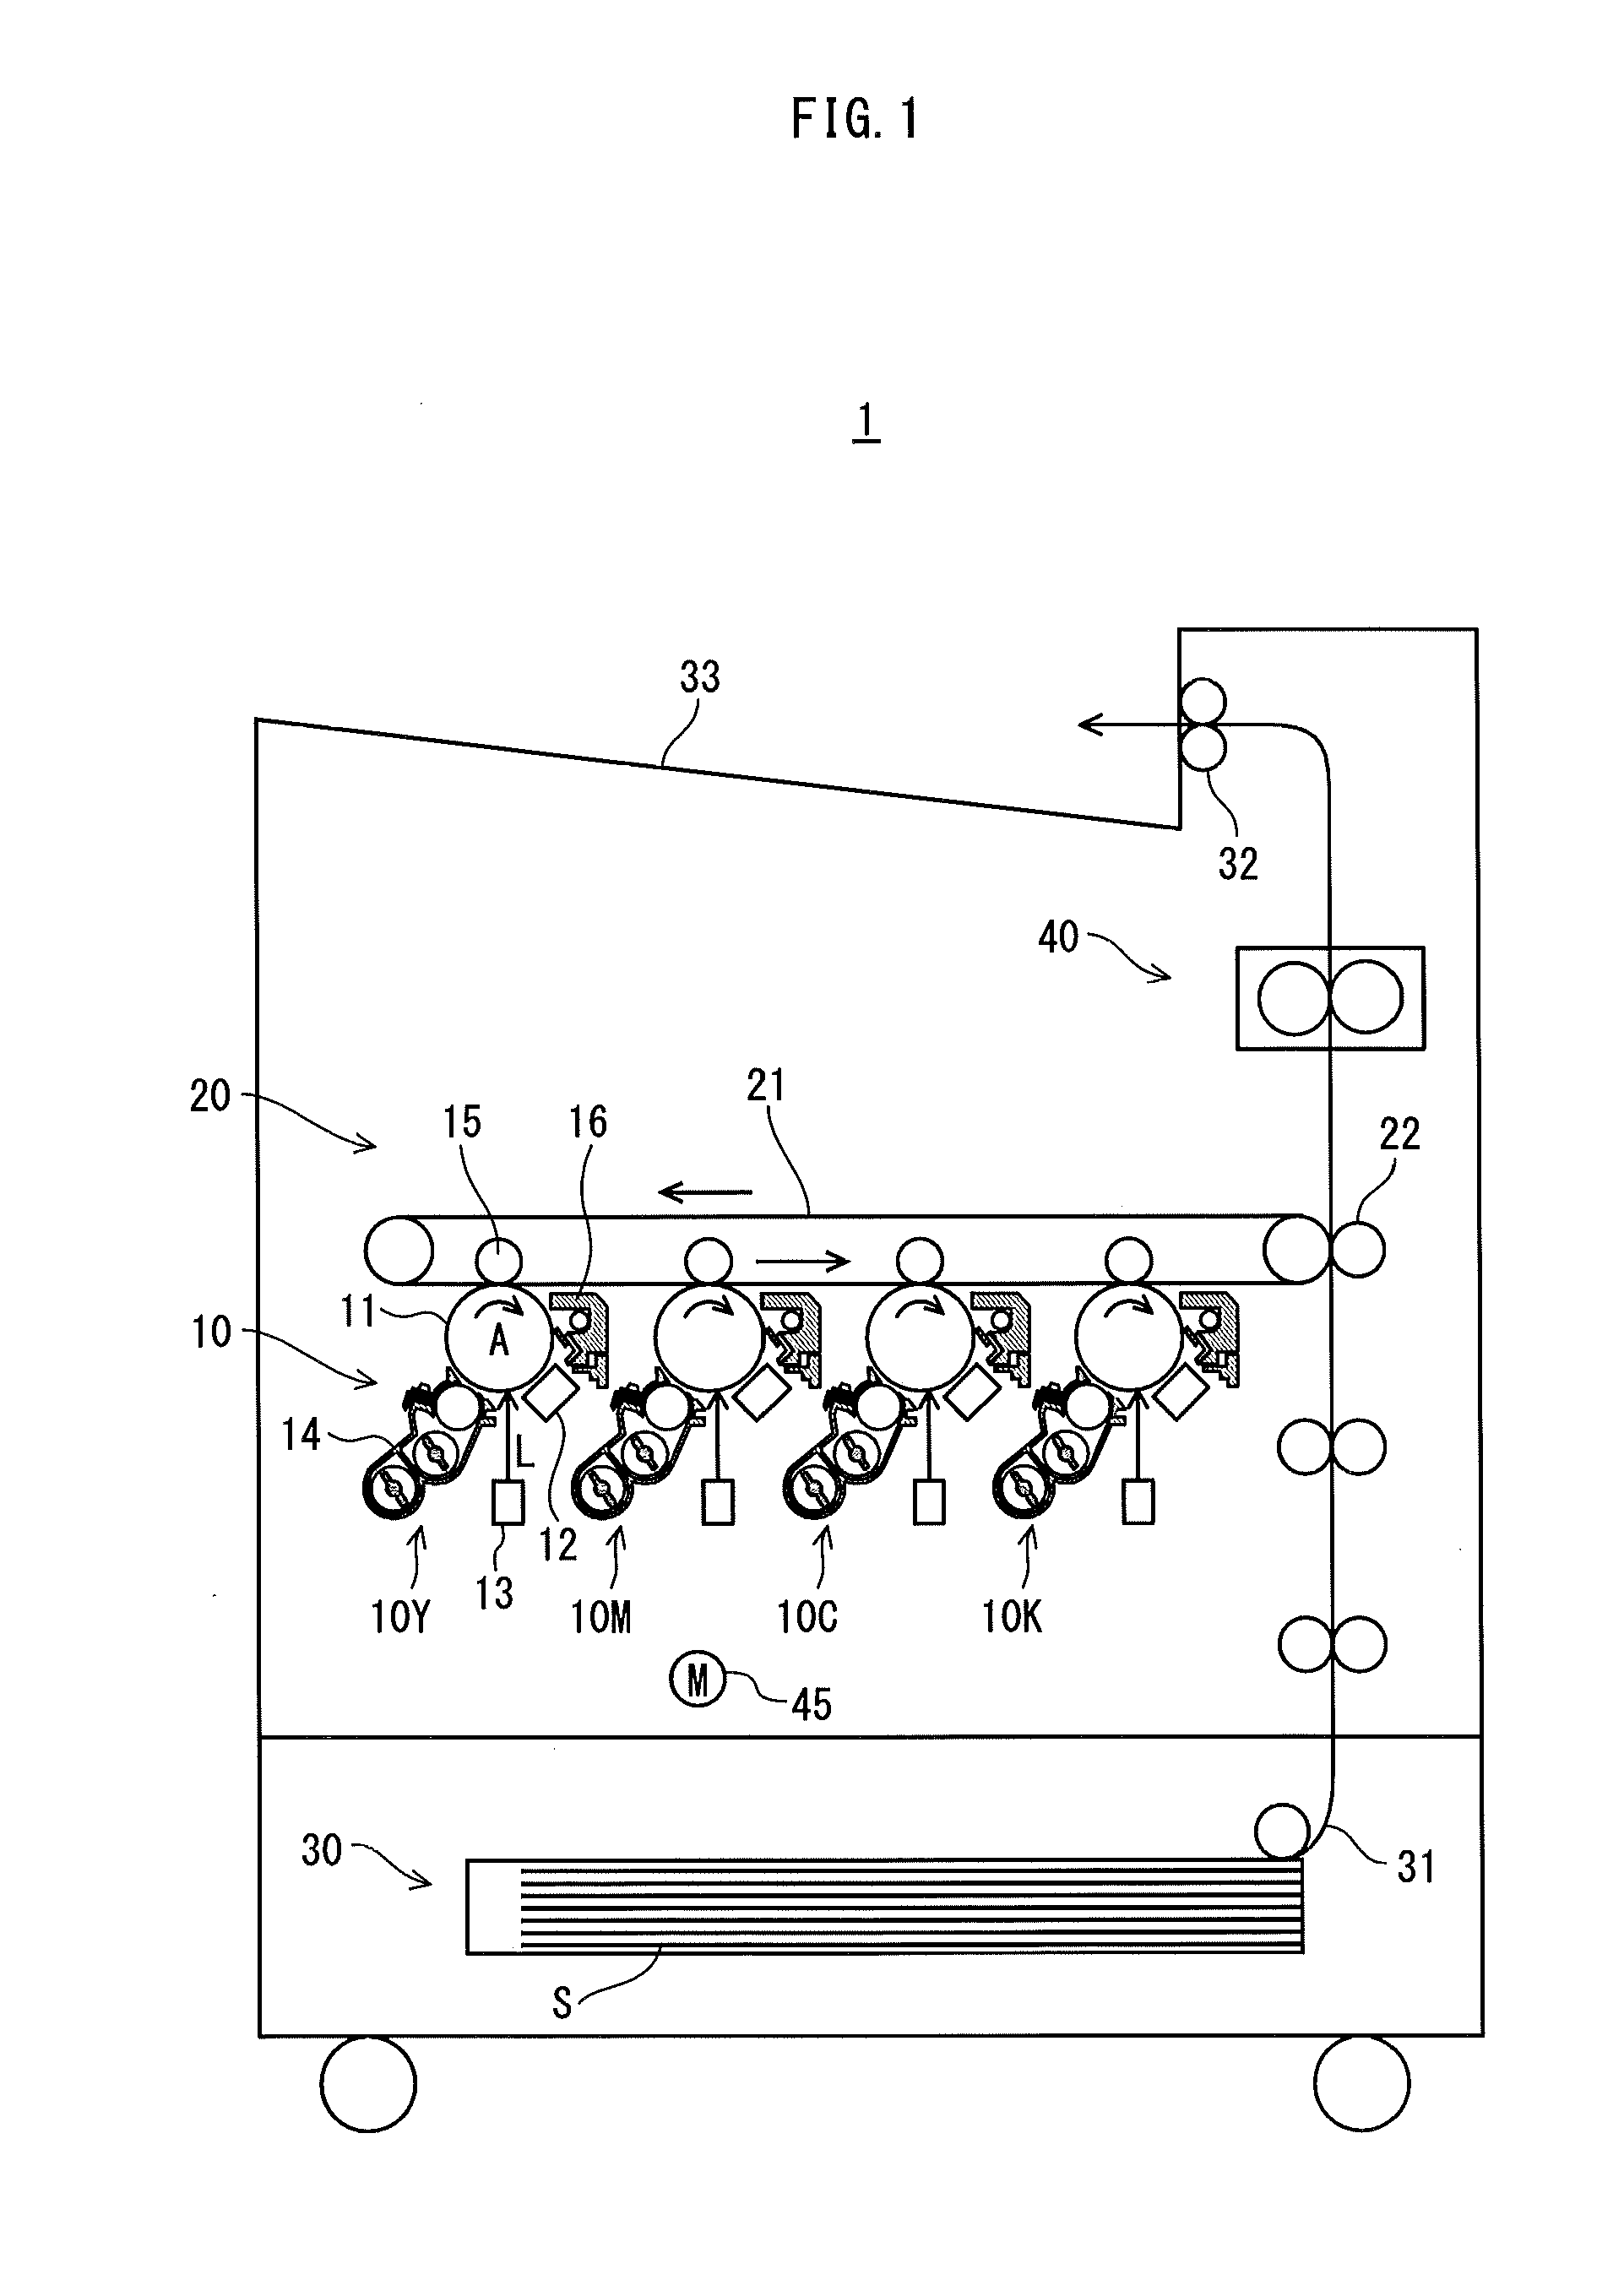 Developing device and image formation apparatus